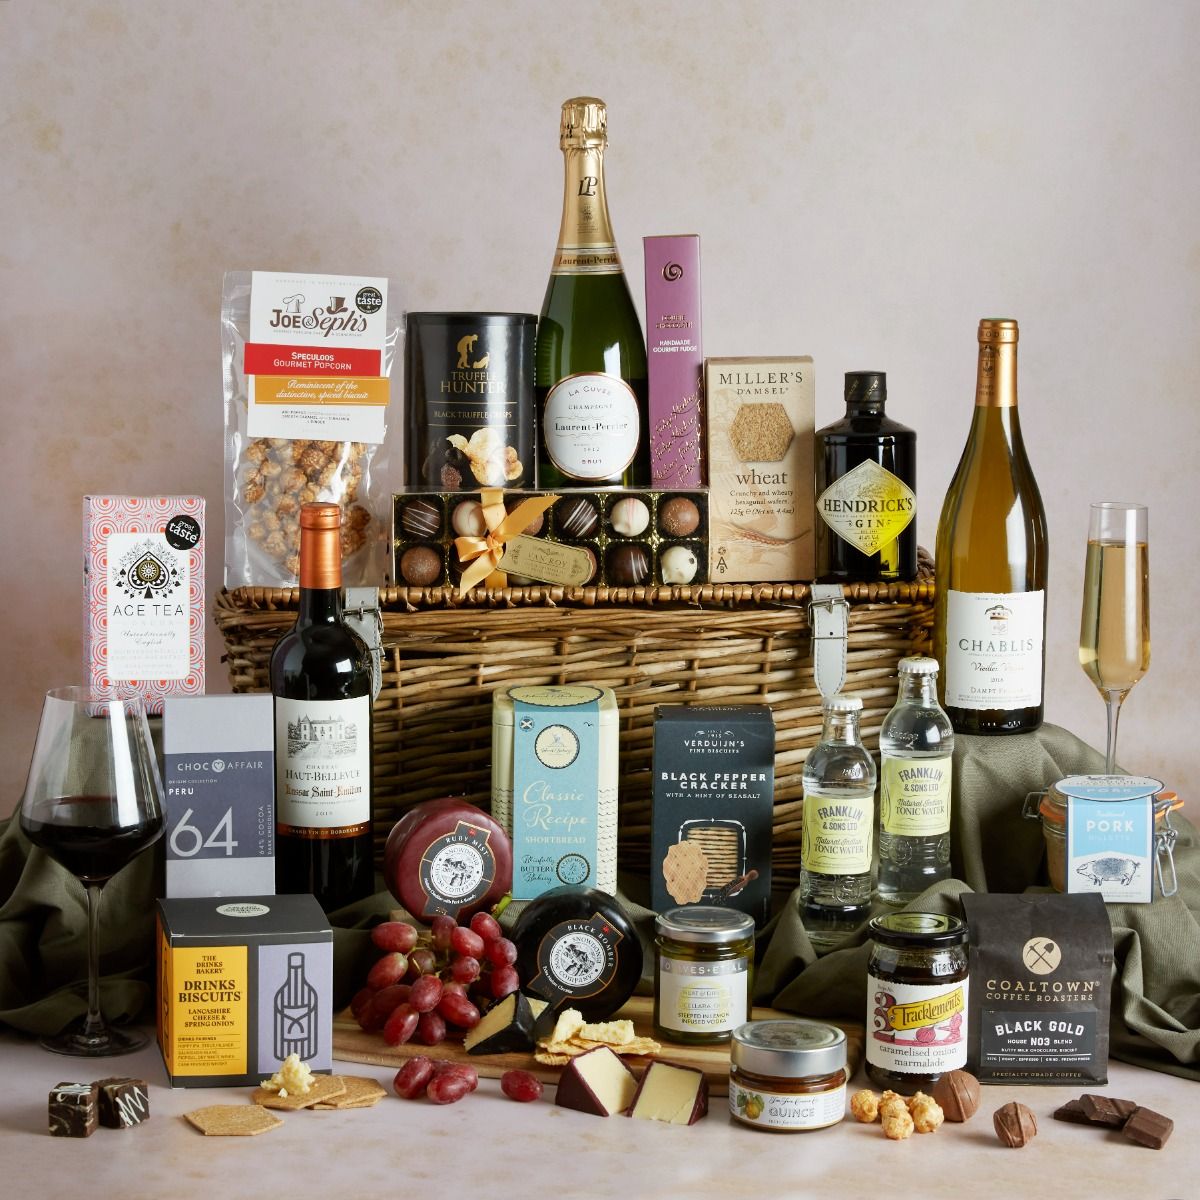 The Grand Food and Wine Hamper with all of its array of food and drink contents on display - the perfect gift for a wedding